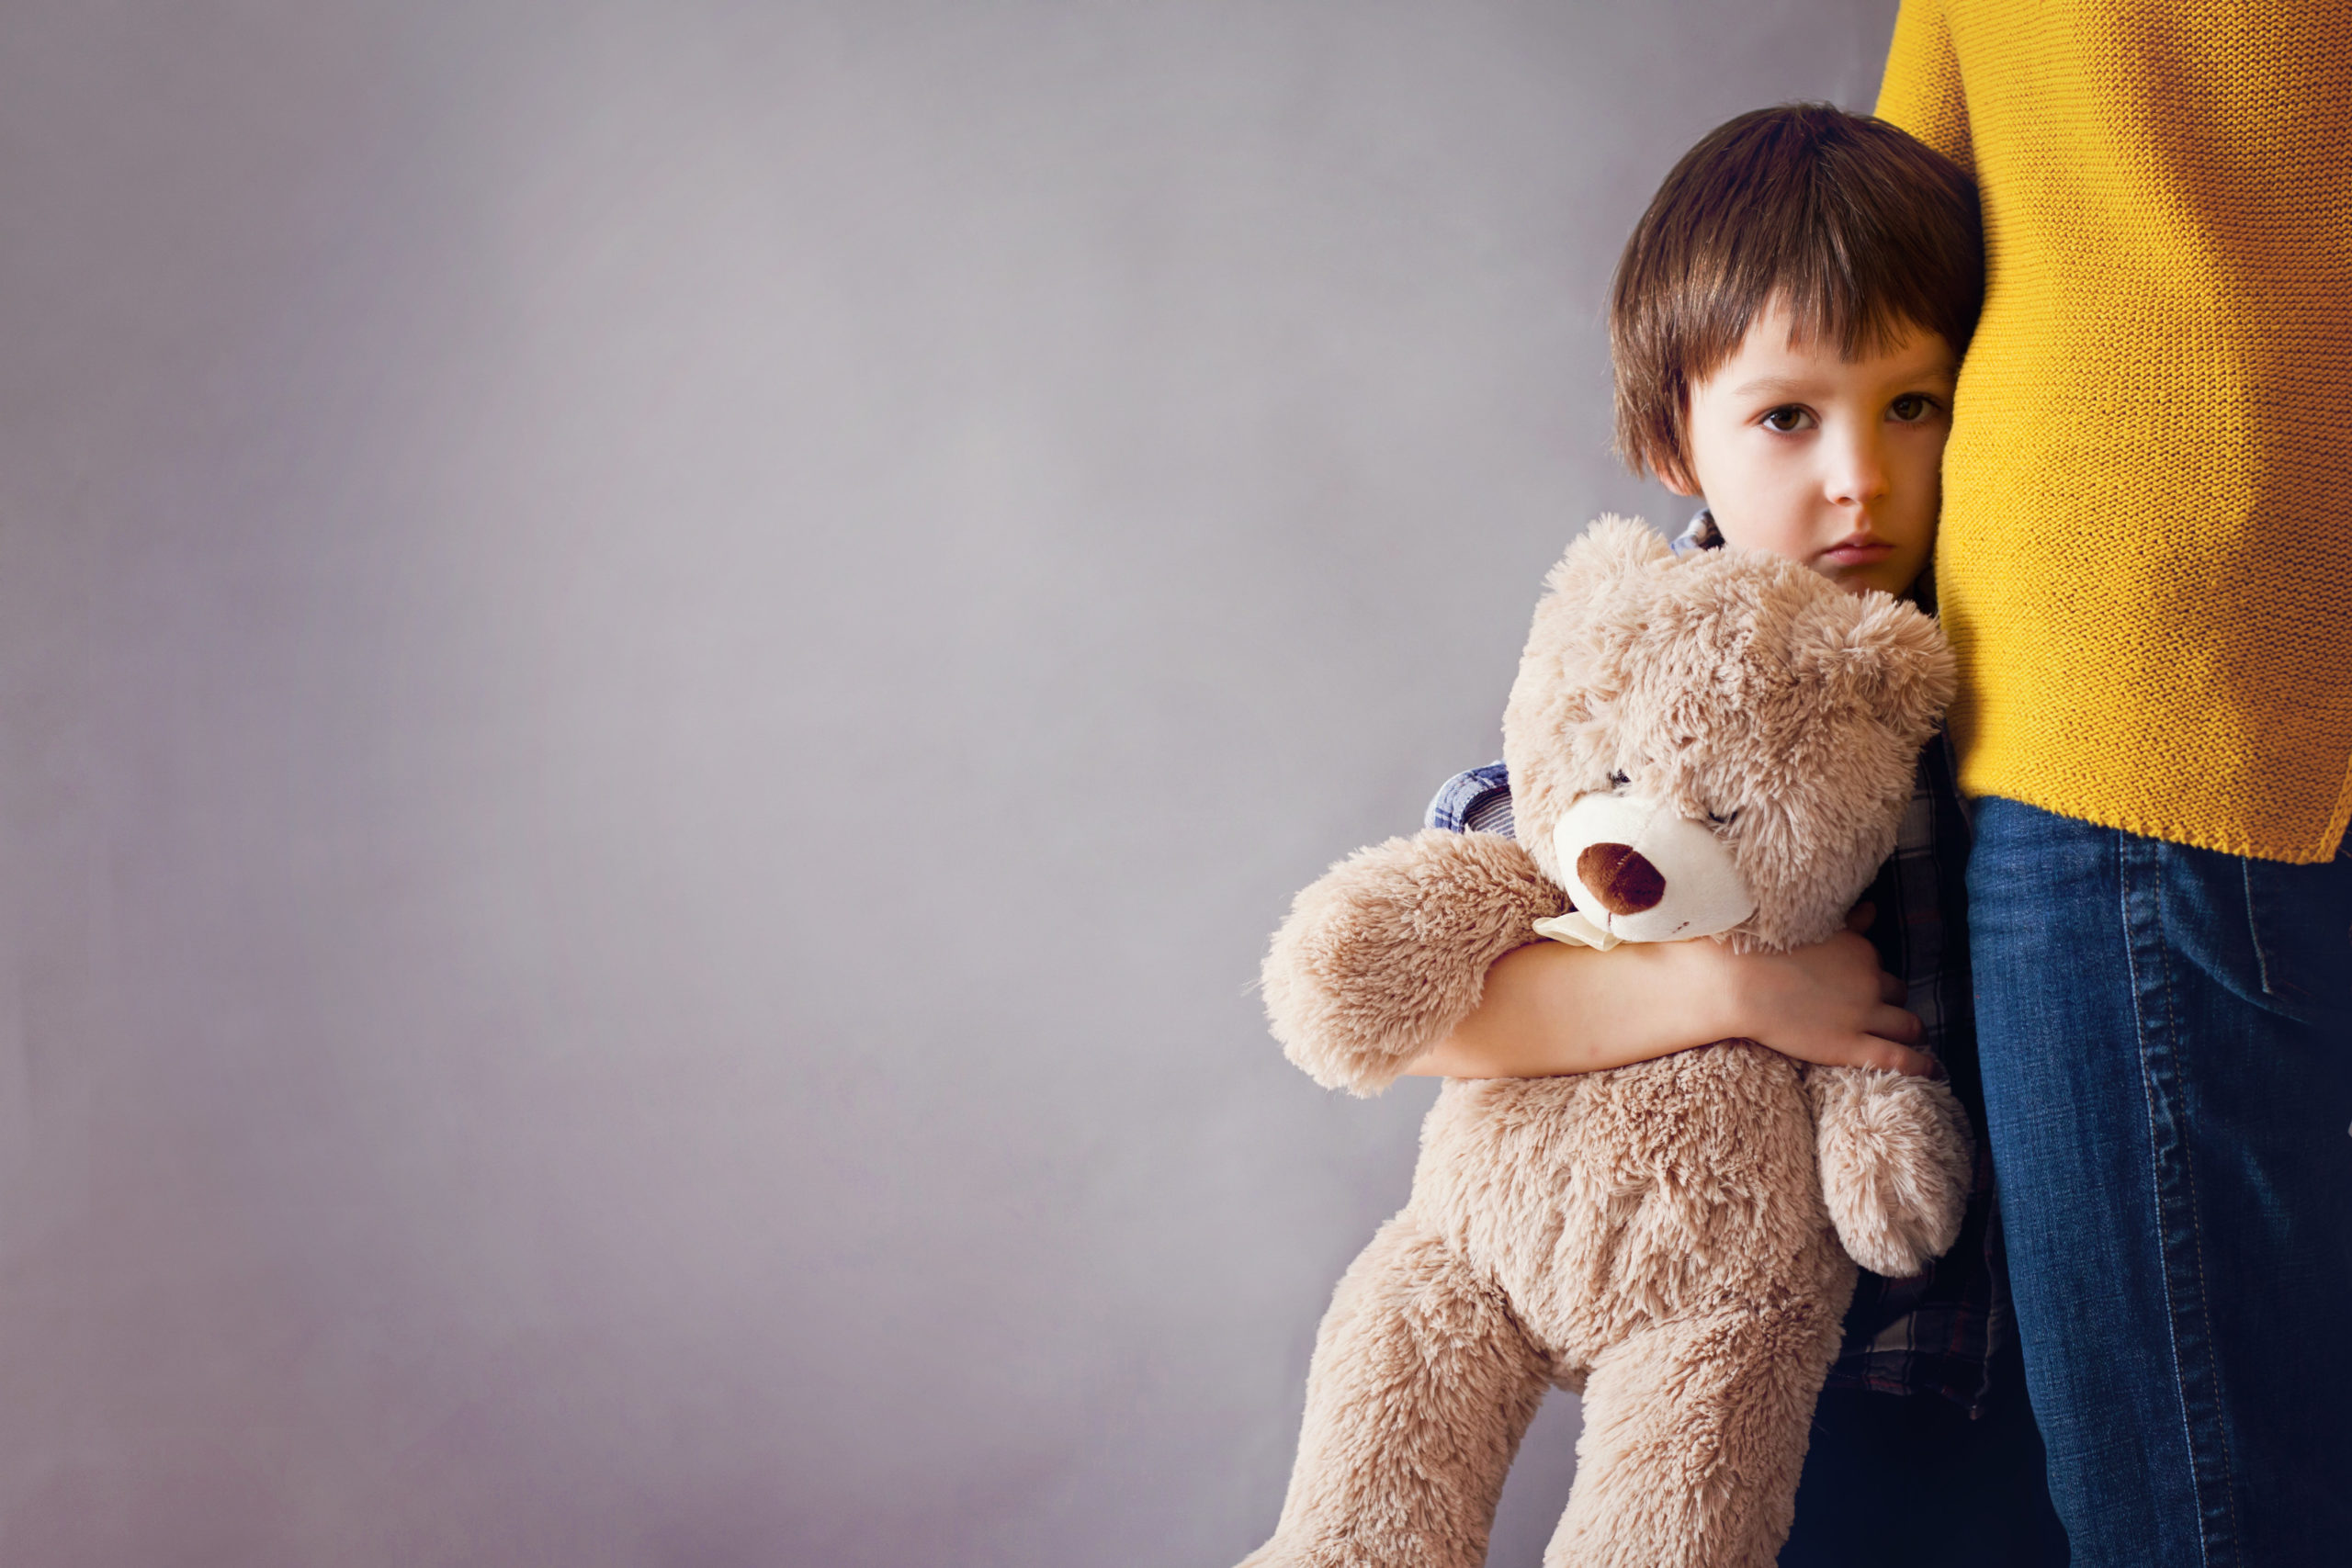  The Kids Are Not Alright –  How Can Parents Help?